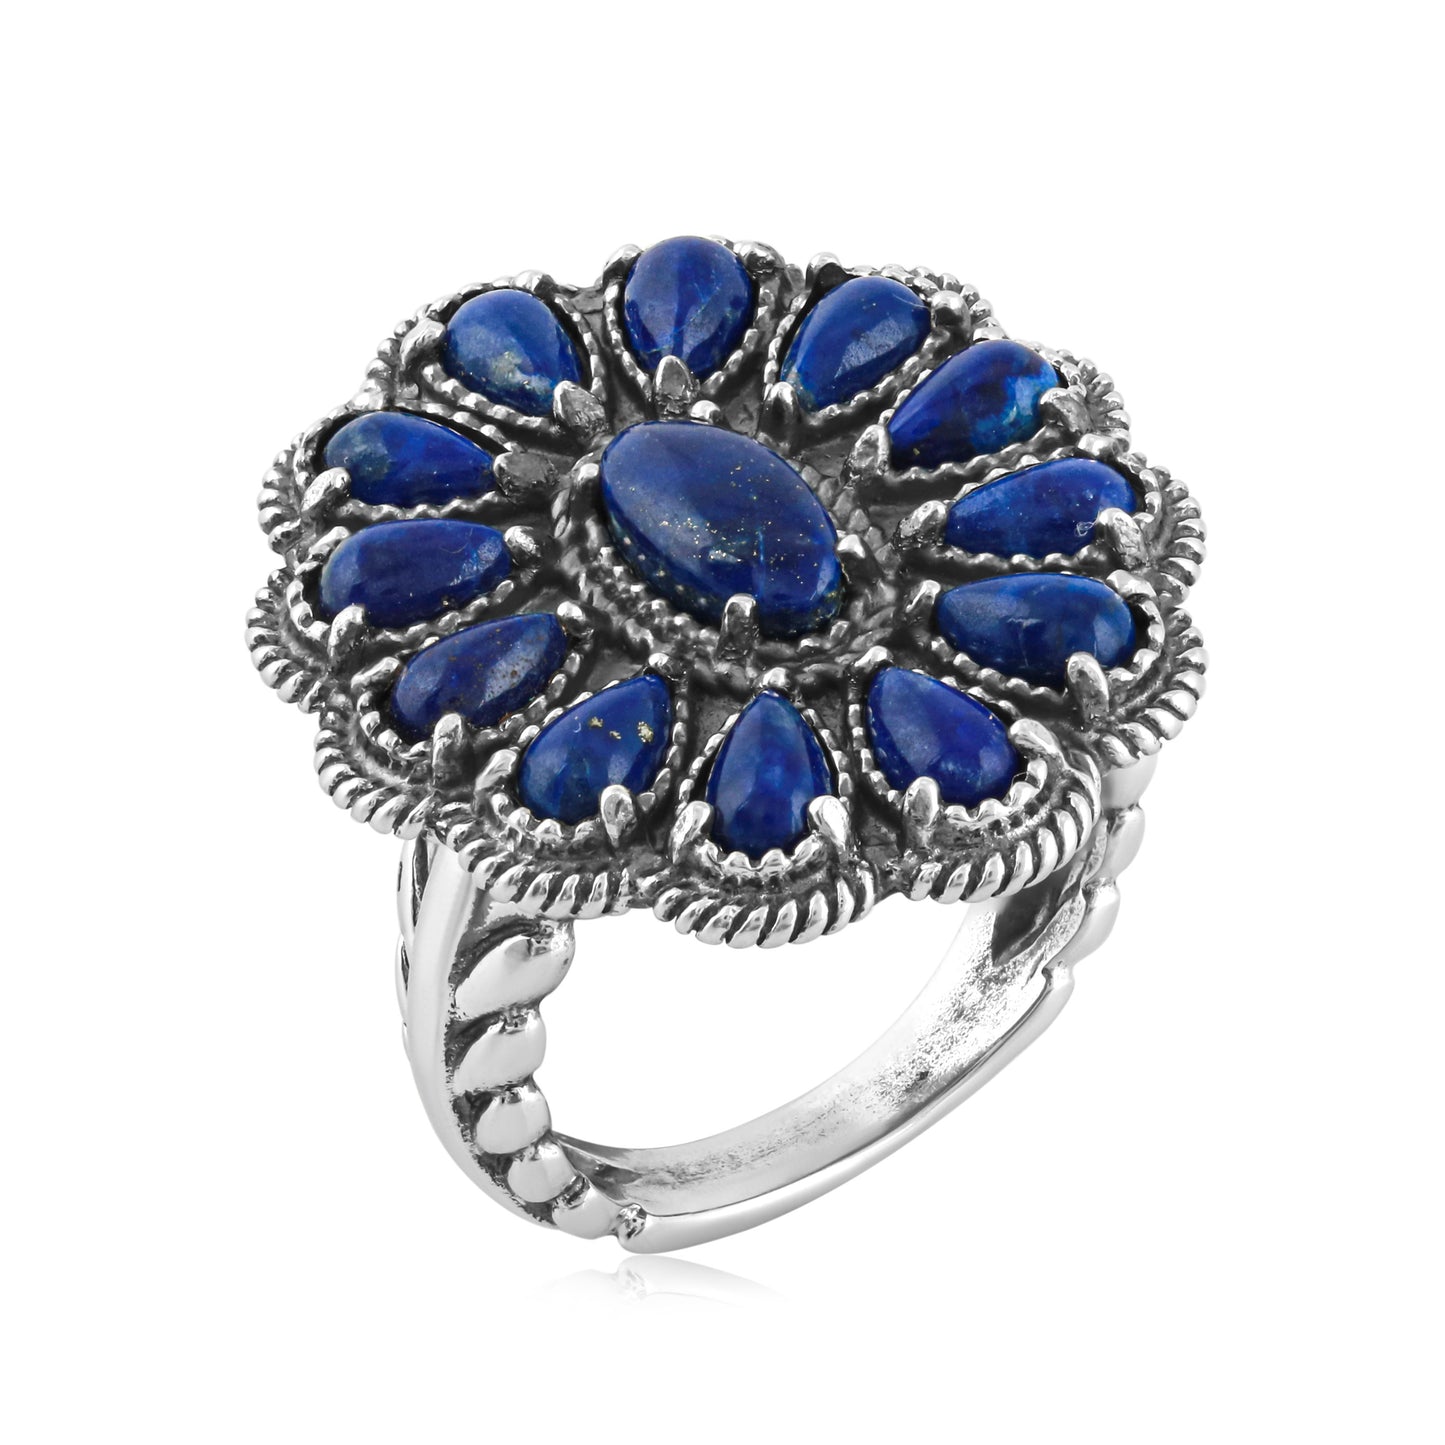 Sterling Silver Lapis Gemstone Flower Cluster Design Ring Sizes 5 to 10